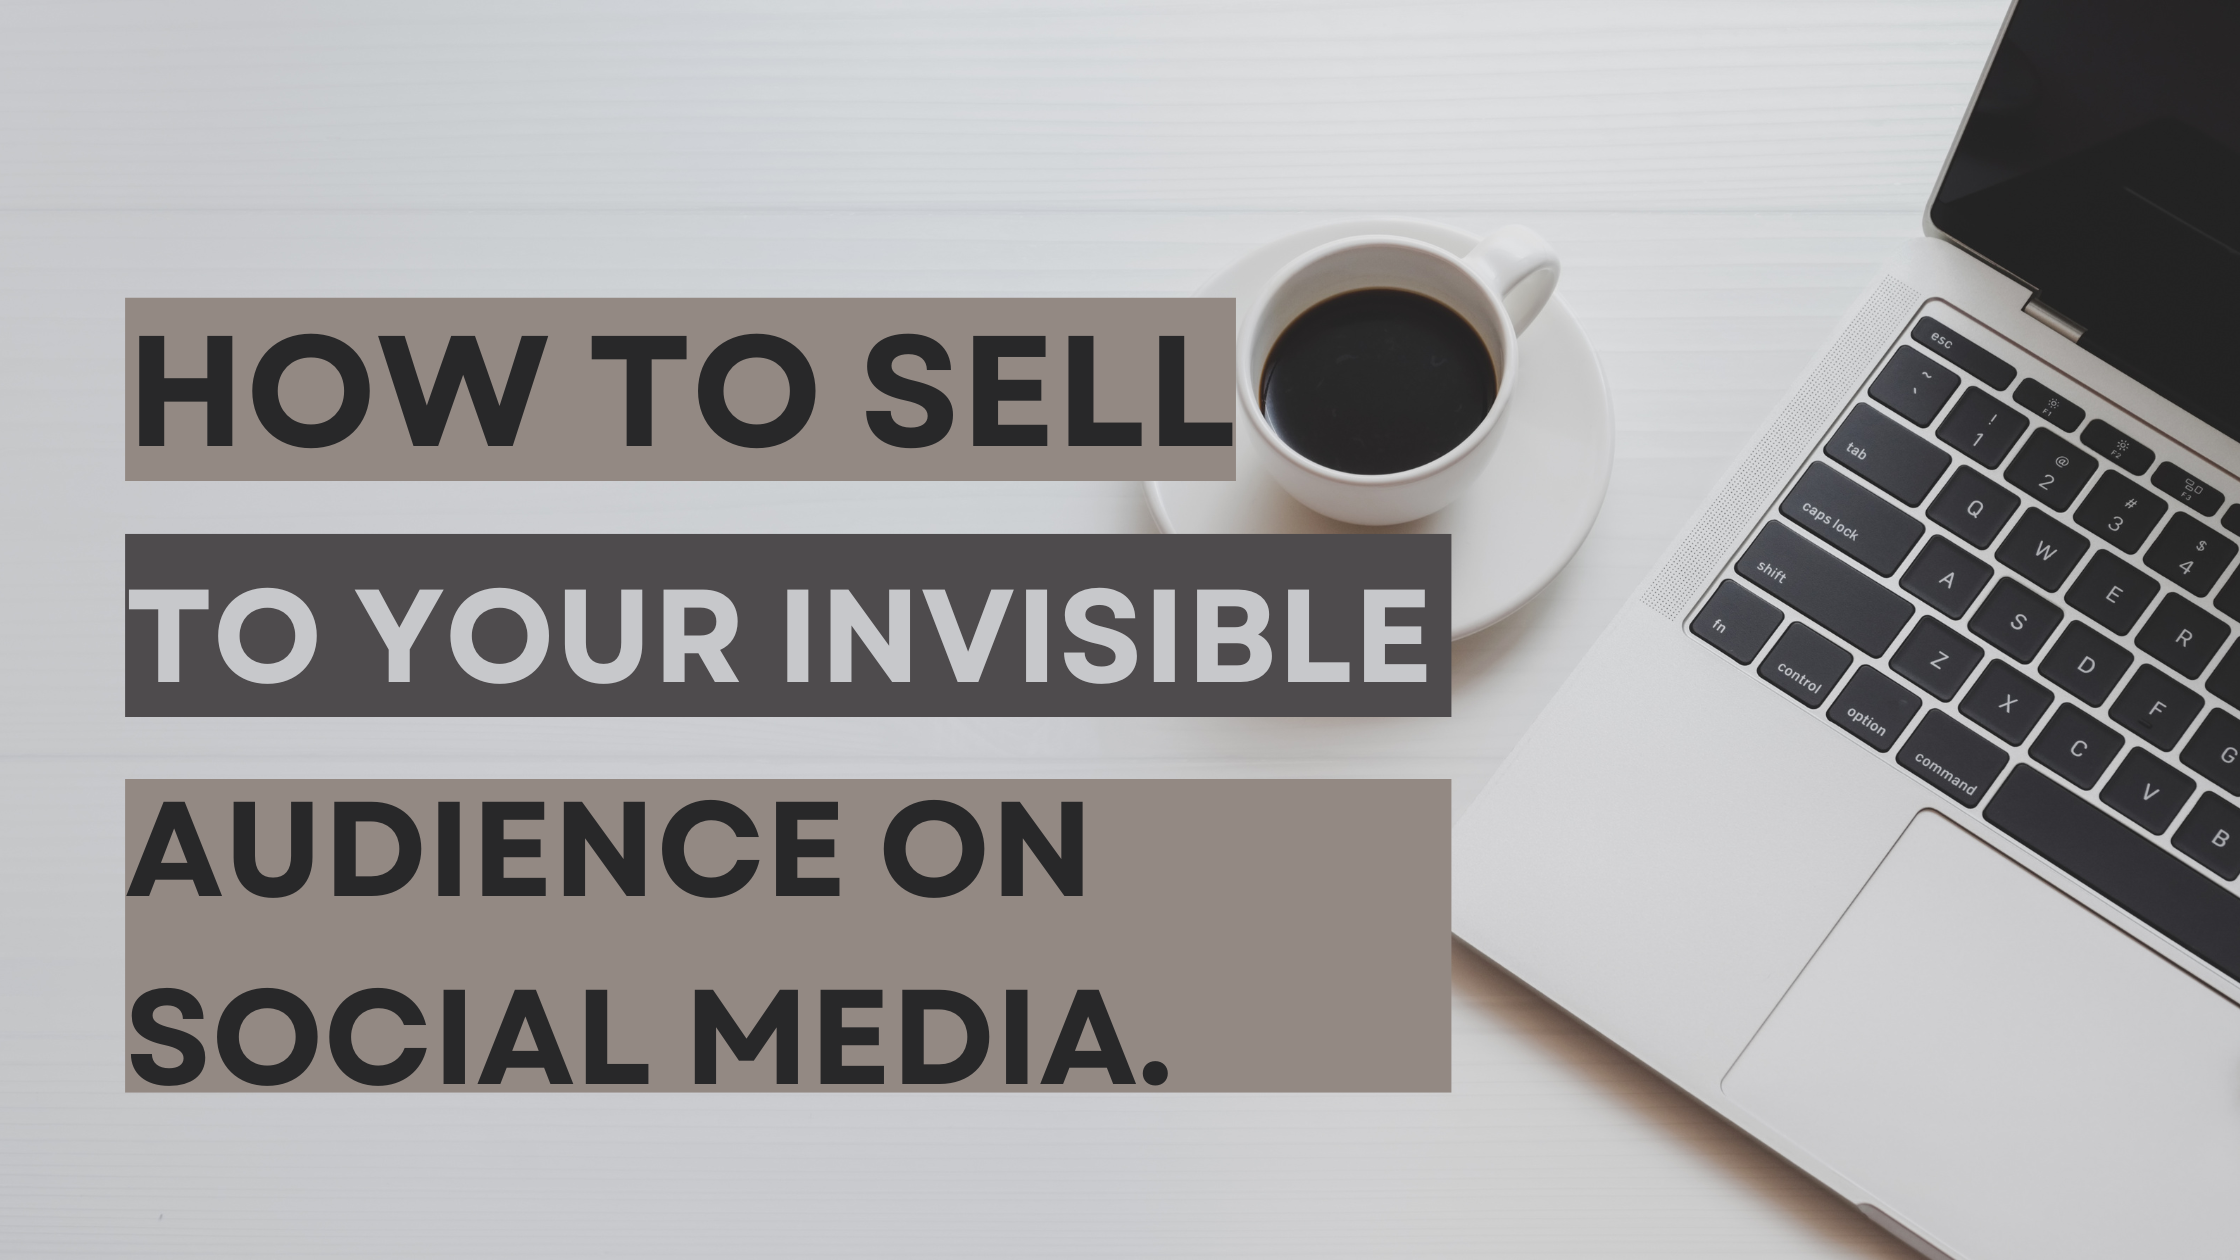 You are currently viewing ON HOW TO SELL TO YOUR INVISIBLE AUDIENCE ON SOCIAL MEDIA